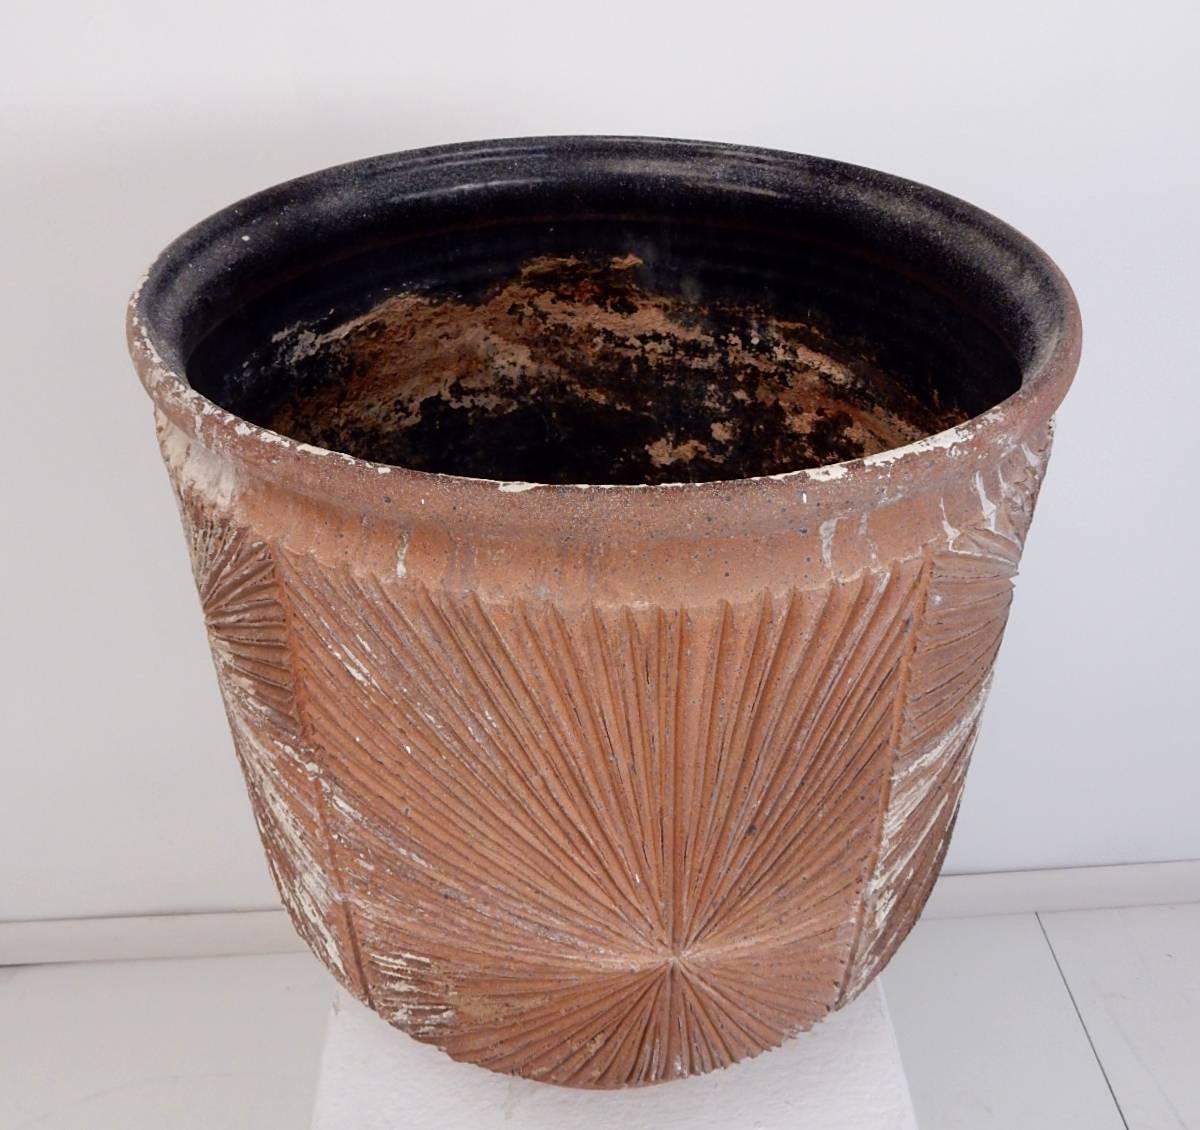 1970s stoneware planter pot designed by David Cressey and Robert Maxwell for Earthgender.
Large size measuring 16 inch tall X 15 inch wide.
Very good condition with no cracks, chips or repairs.